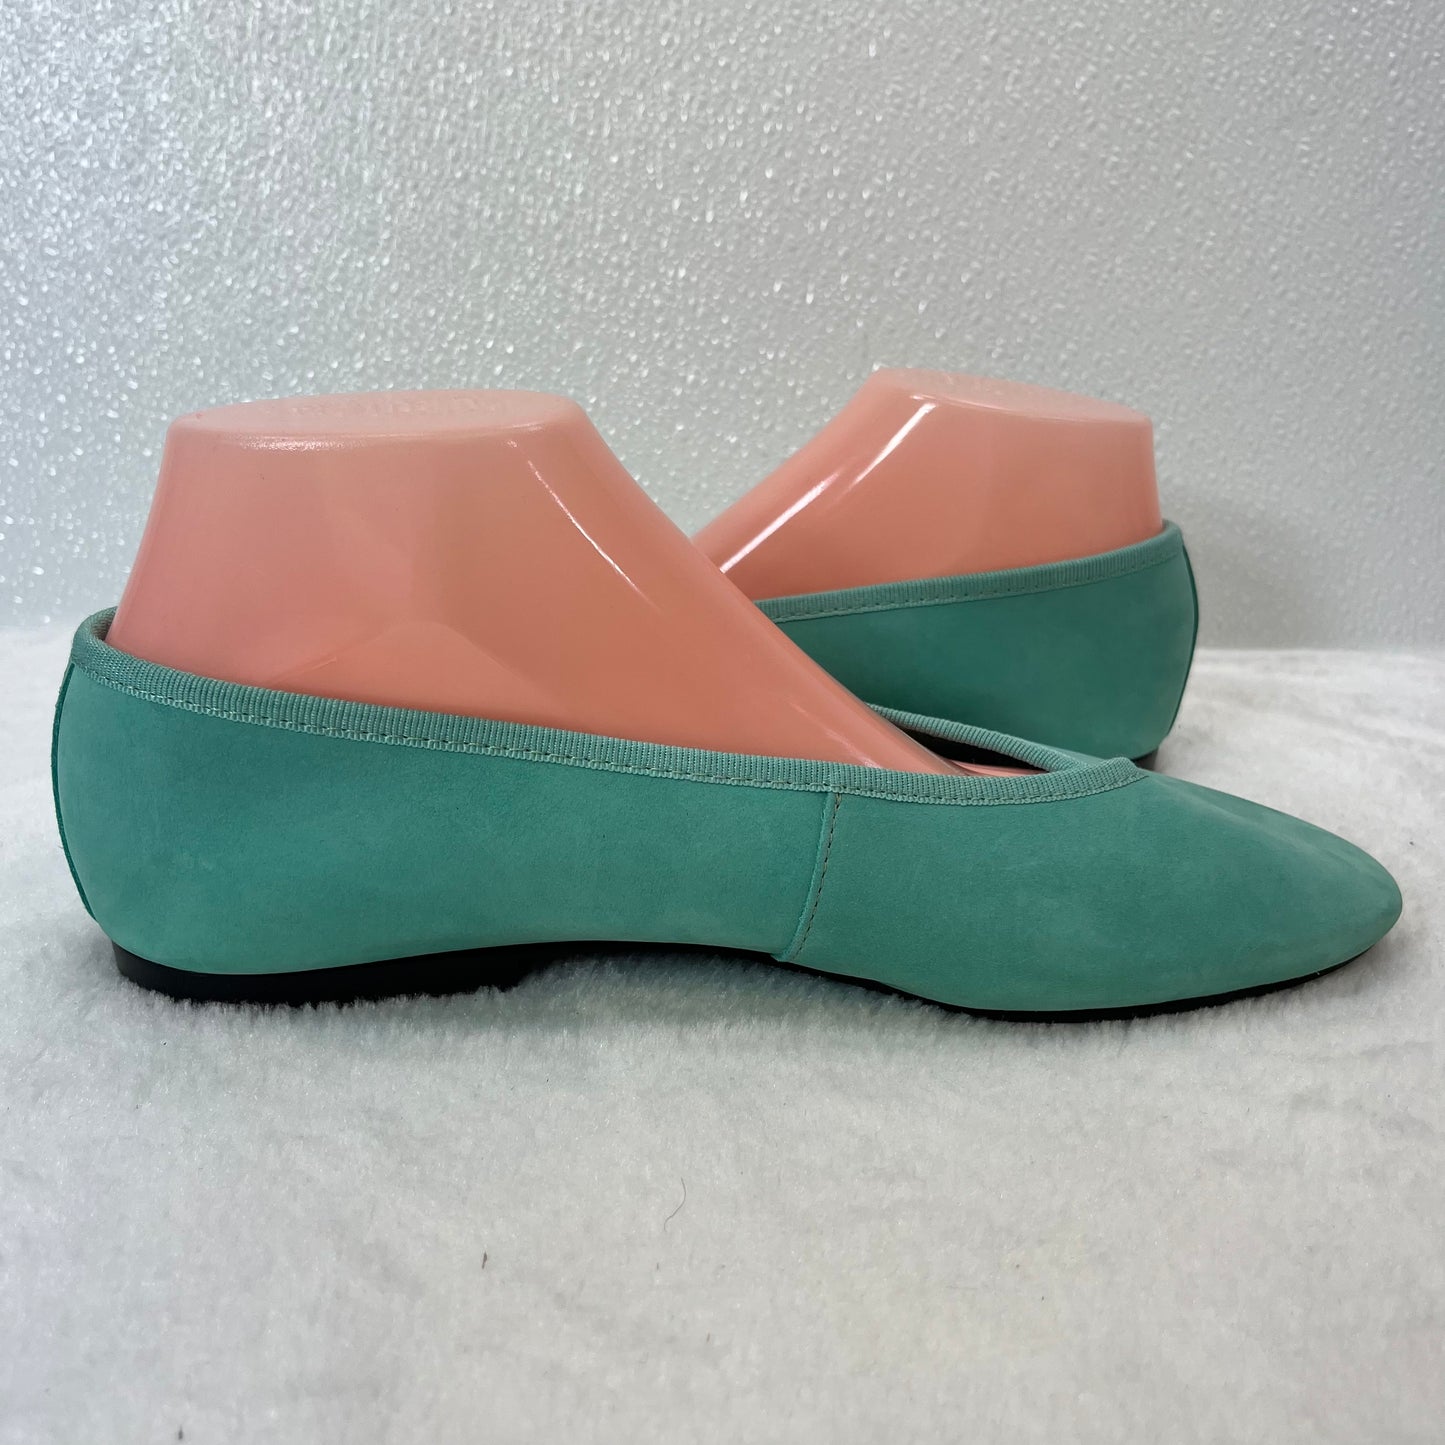 Shoes Flats Ballet By Clothes Mentor  Size: 11